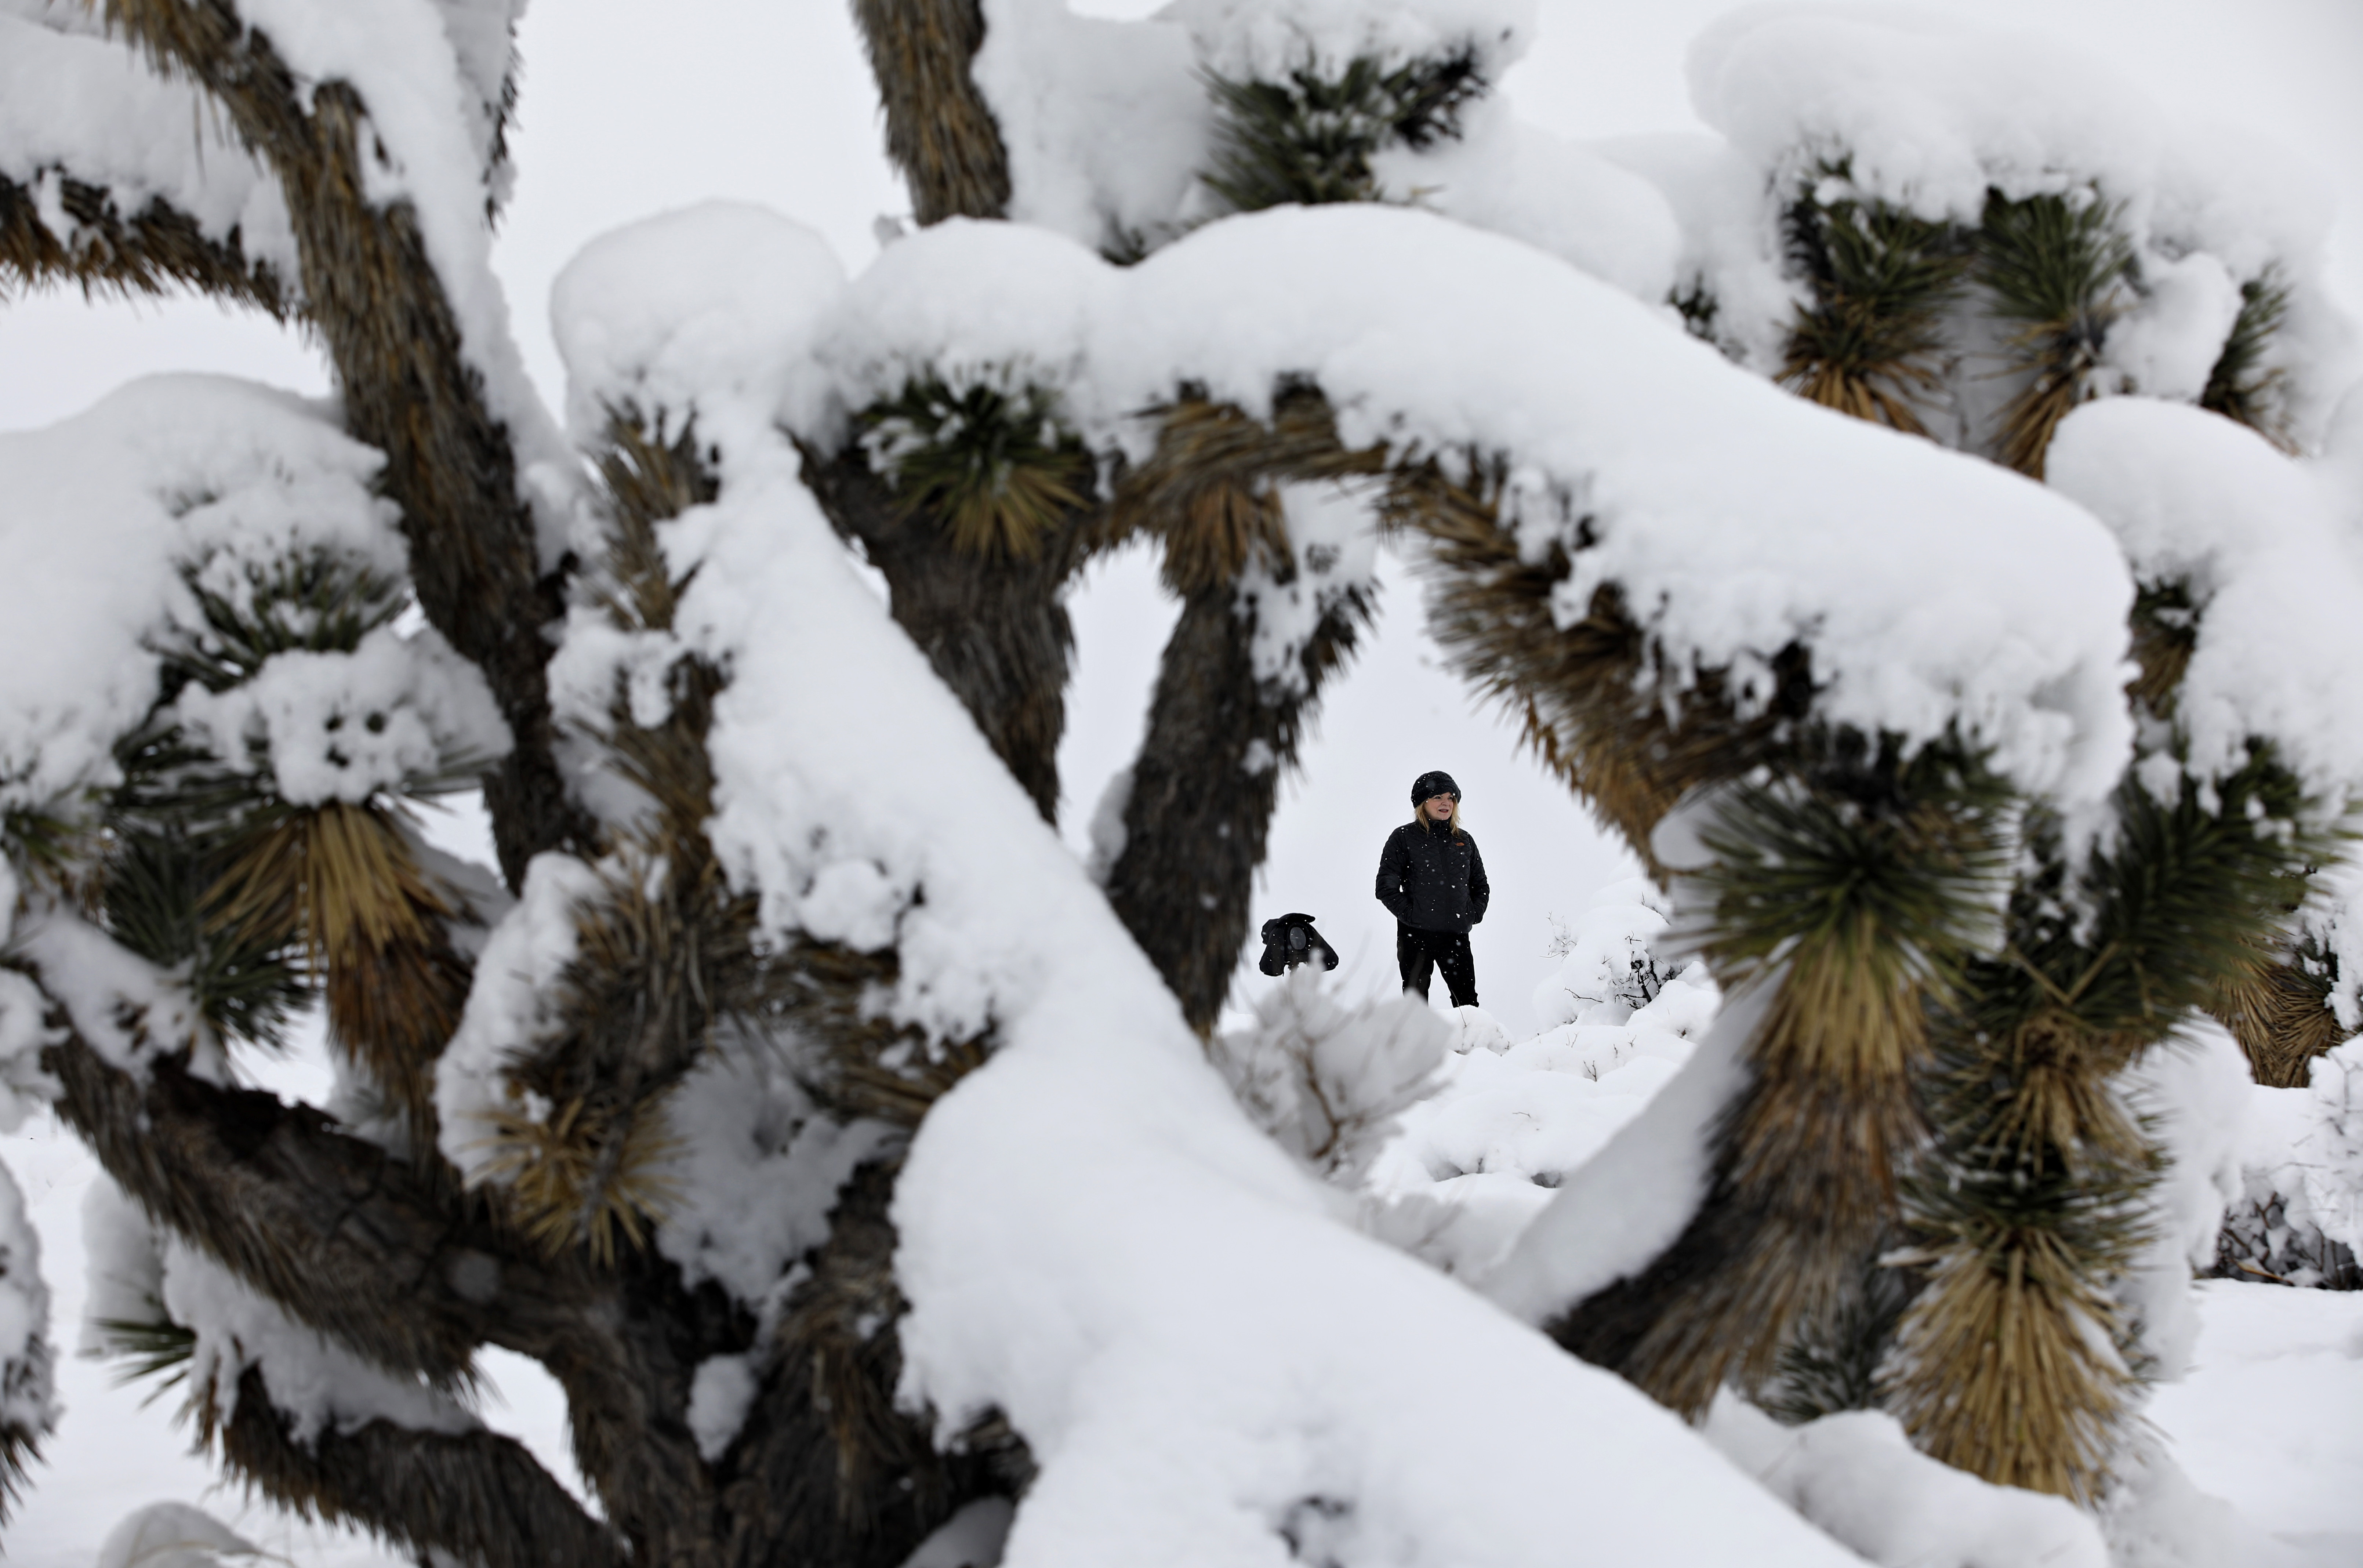 Storm dumps record-breaking snow in Arizona on way to Texas